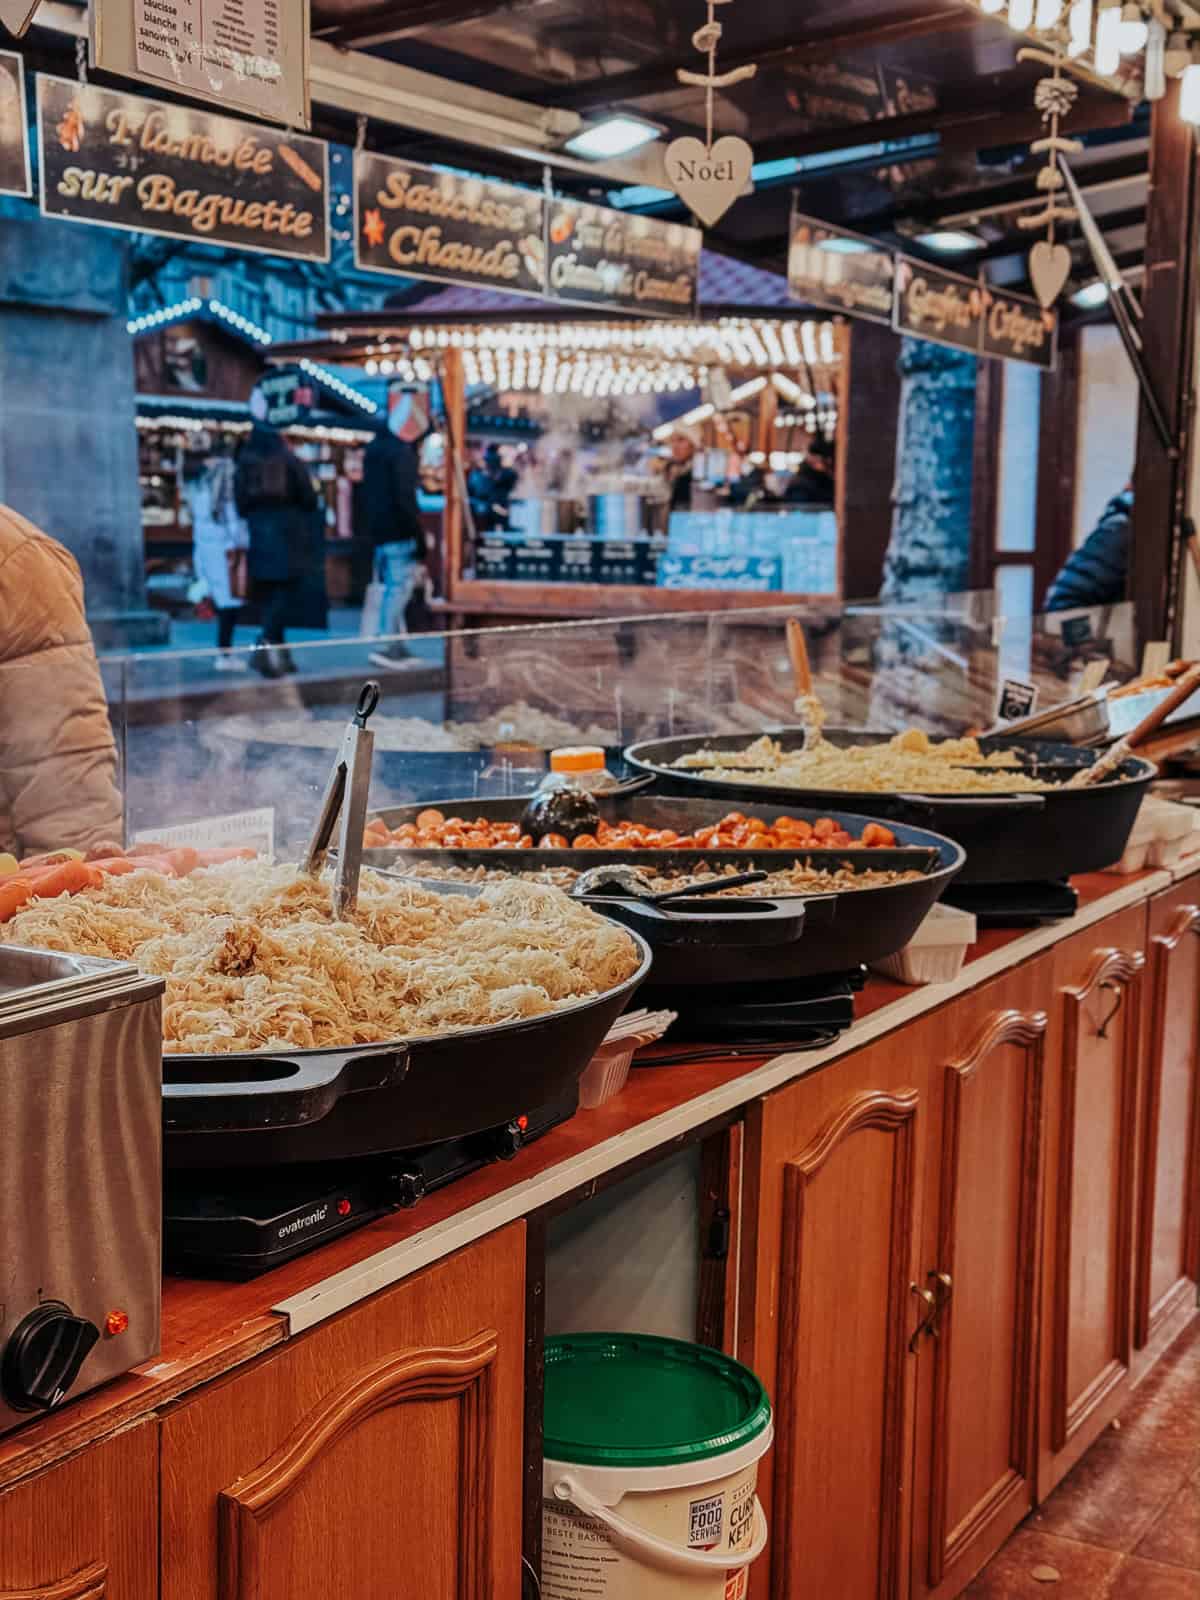 A Christmas market food stall in Kaysersberg offering steaming dishes of sauerkraut and sausages, with festive signs and a merry atmosphere reflected in the shiny countertops.